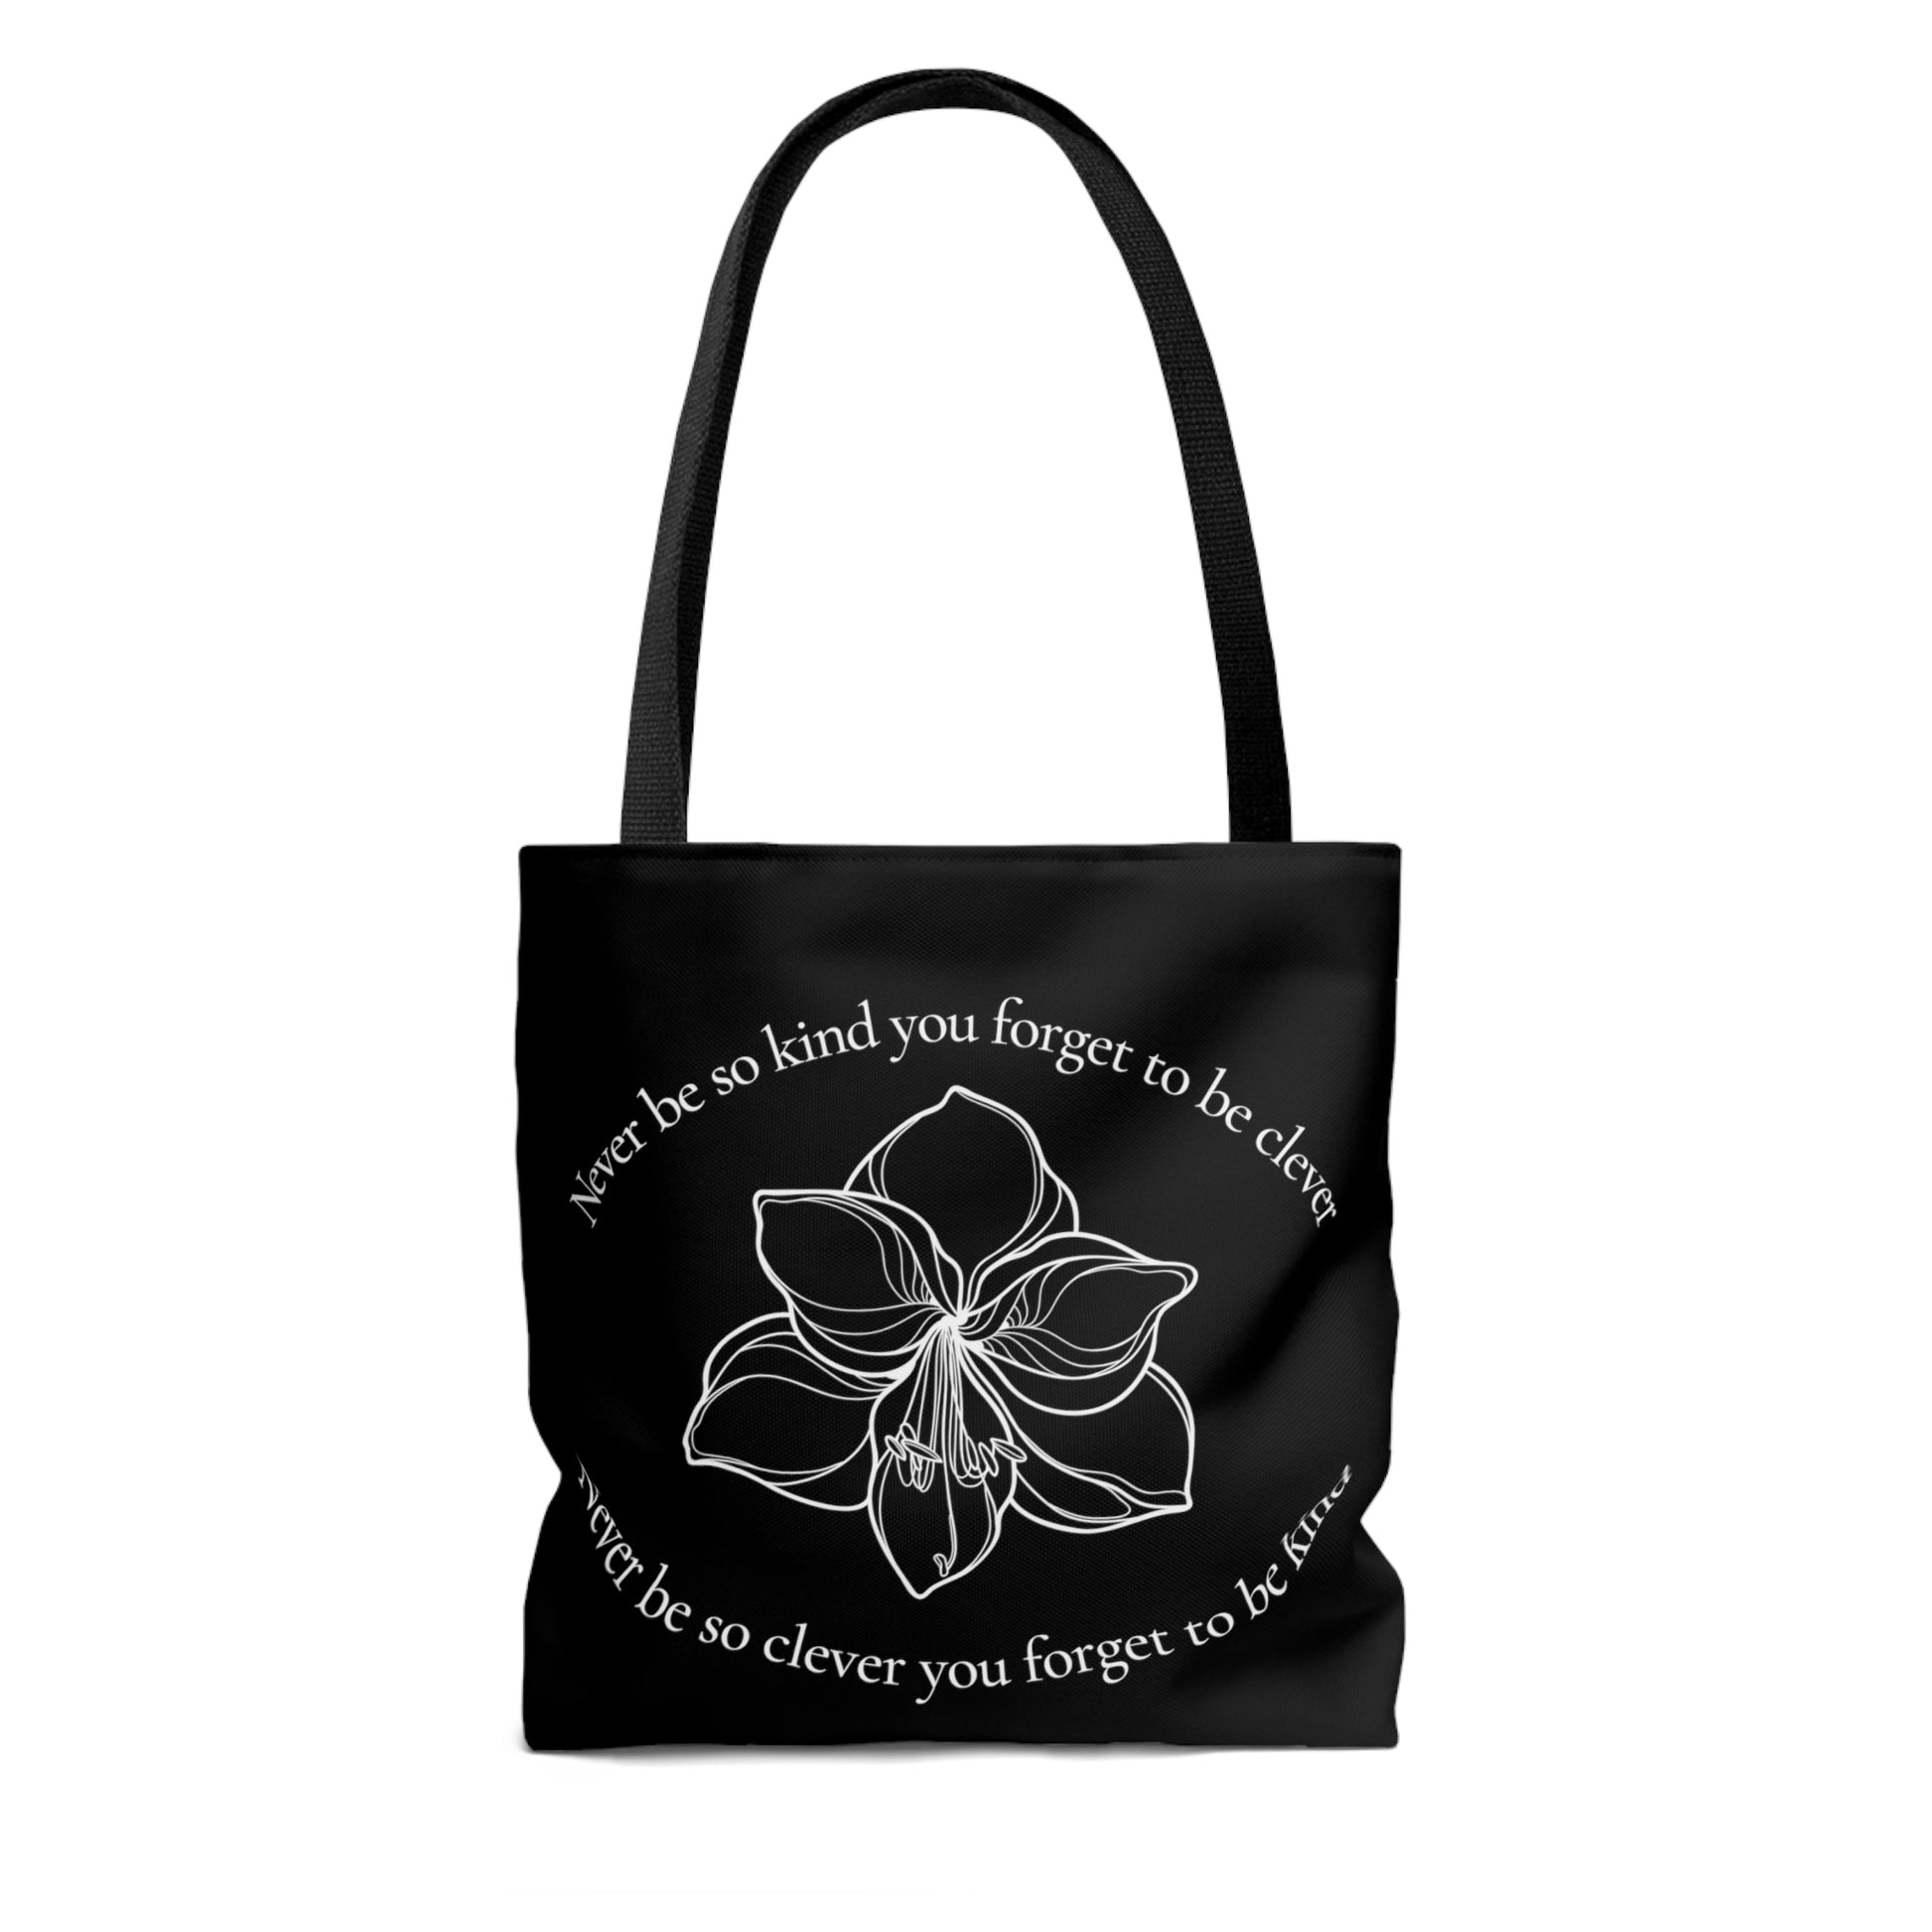 Clever Fan Tote Bag